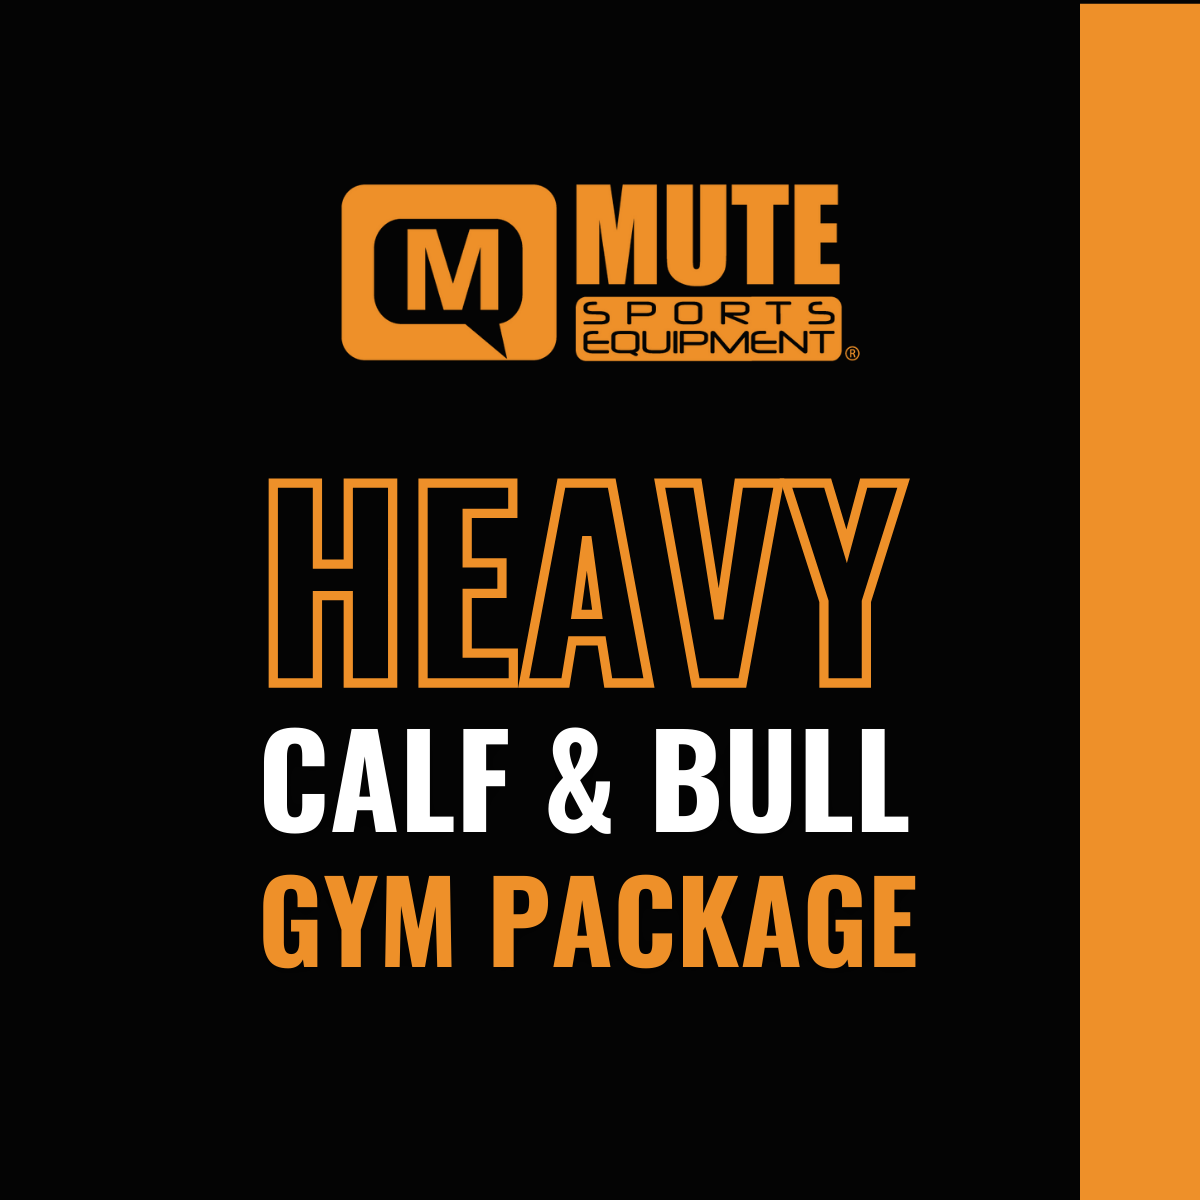 10 Heavy Jump Ropes Gym Package 5 CALF and 5 BULL